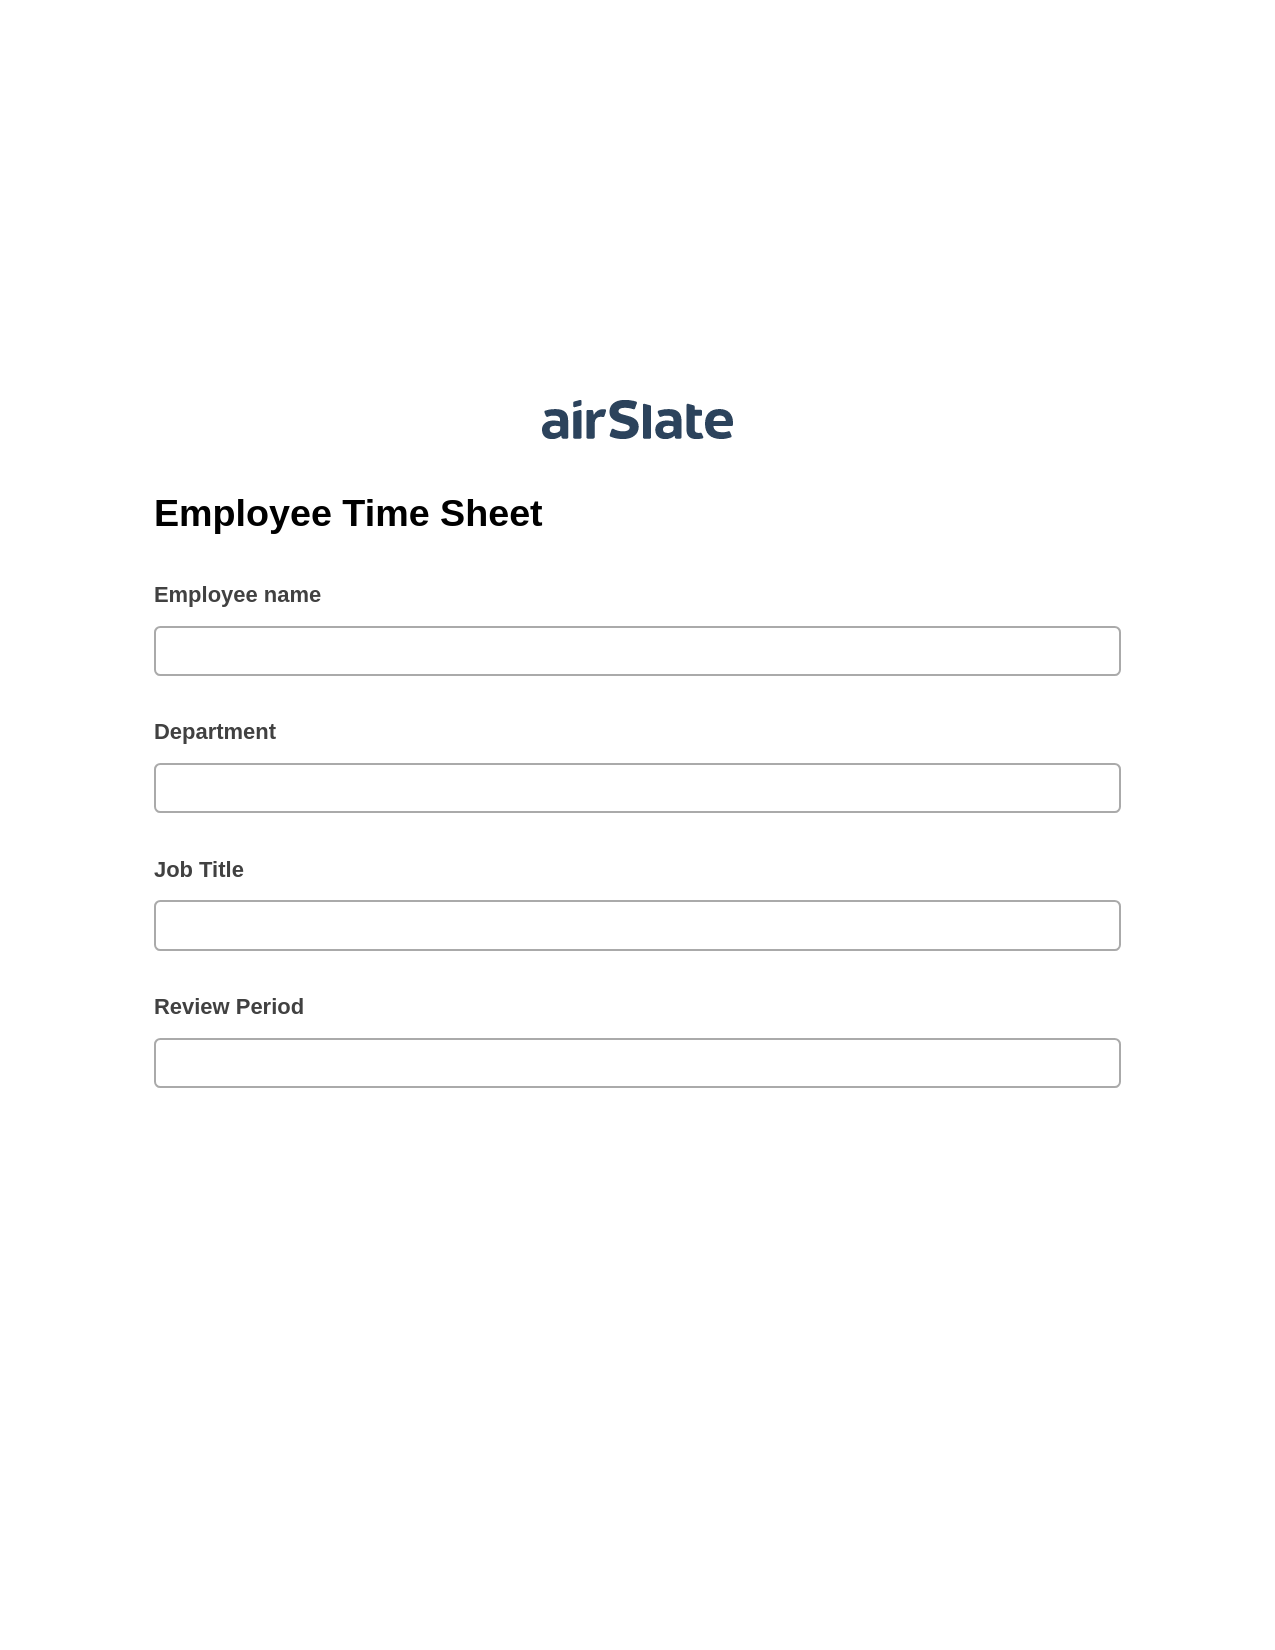 Employee Time Sheet Pre-fill from Salesforce Records with SOQL Bot, Assign Roles to Recipients Bot, Archive to Dropbox Bot